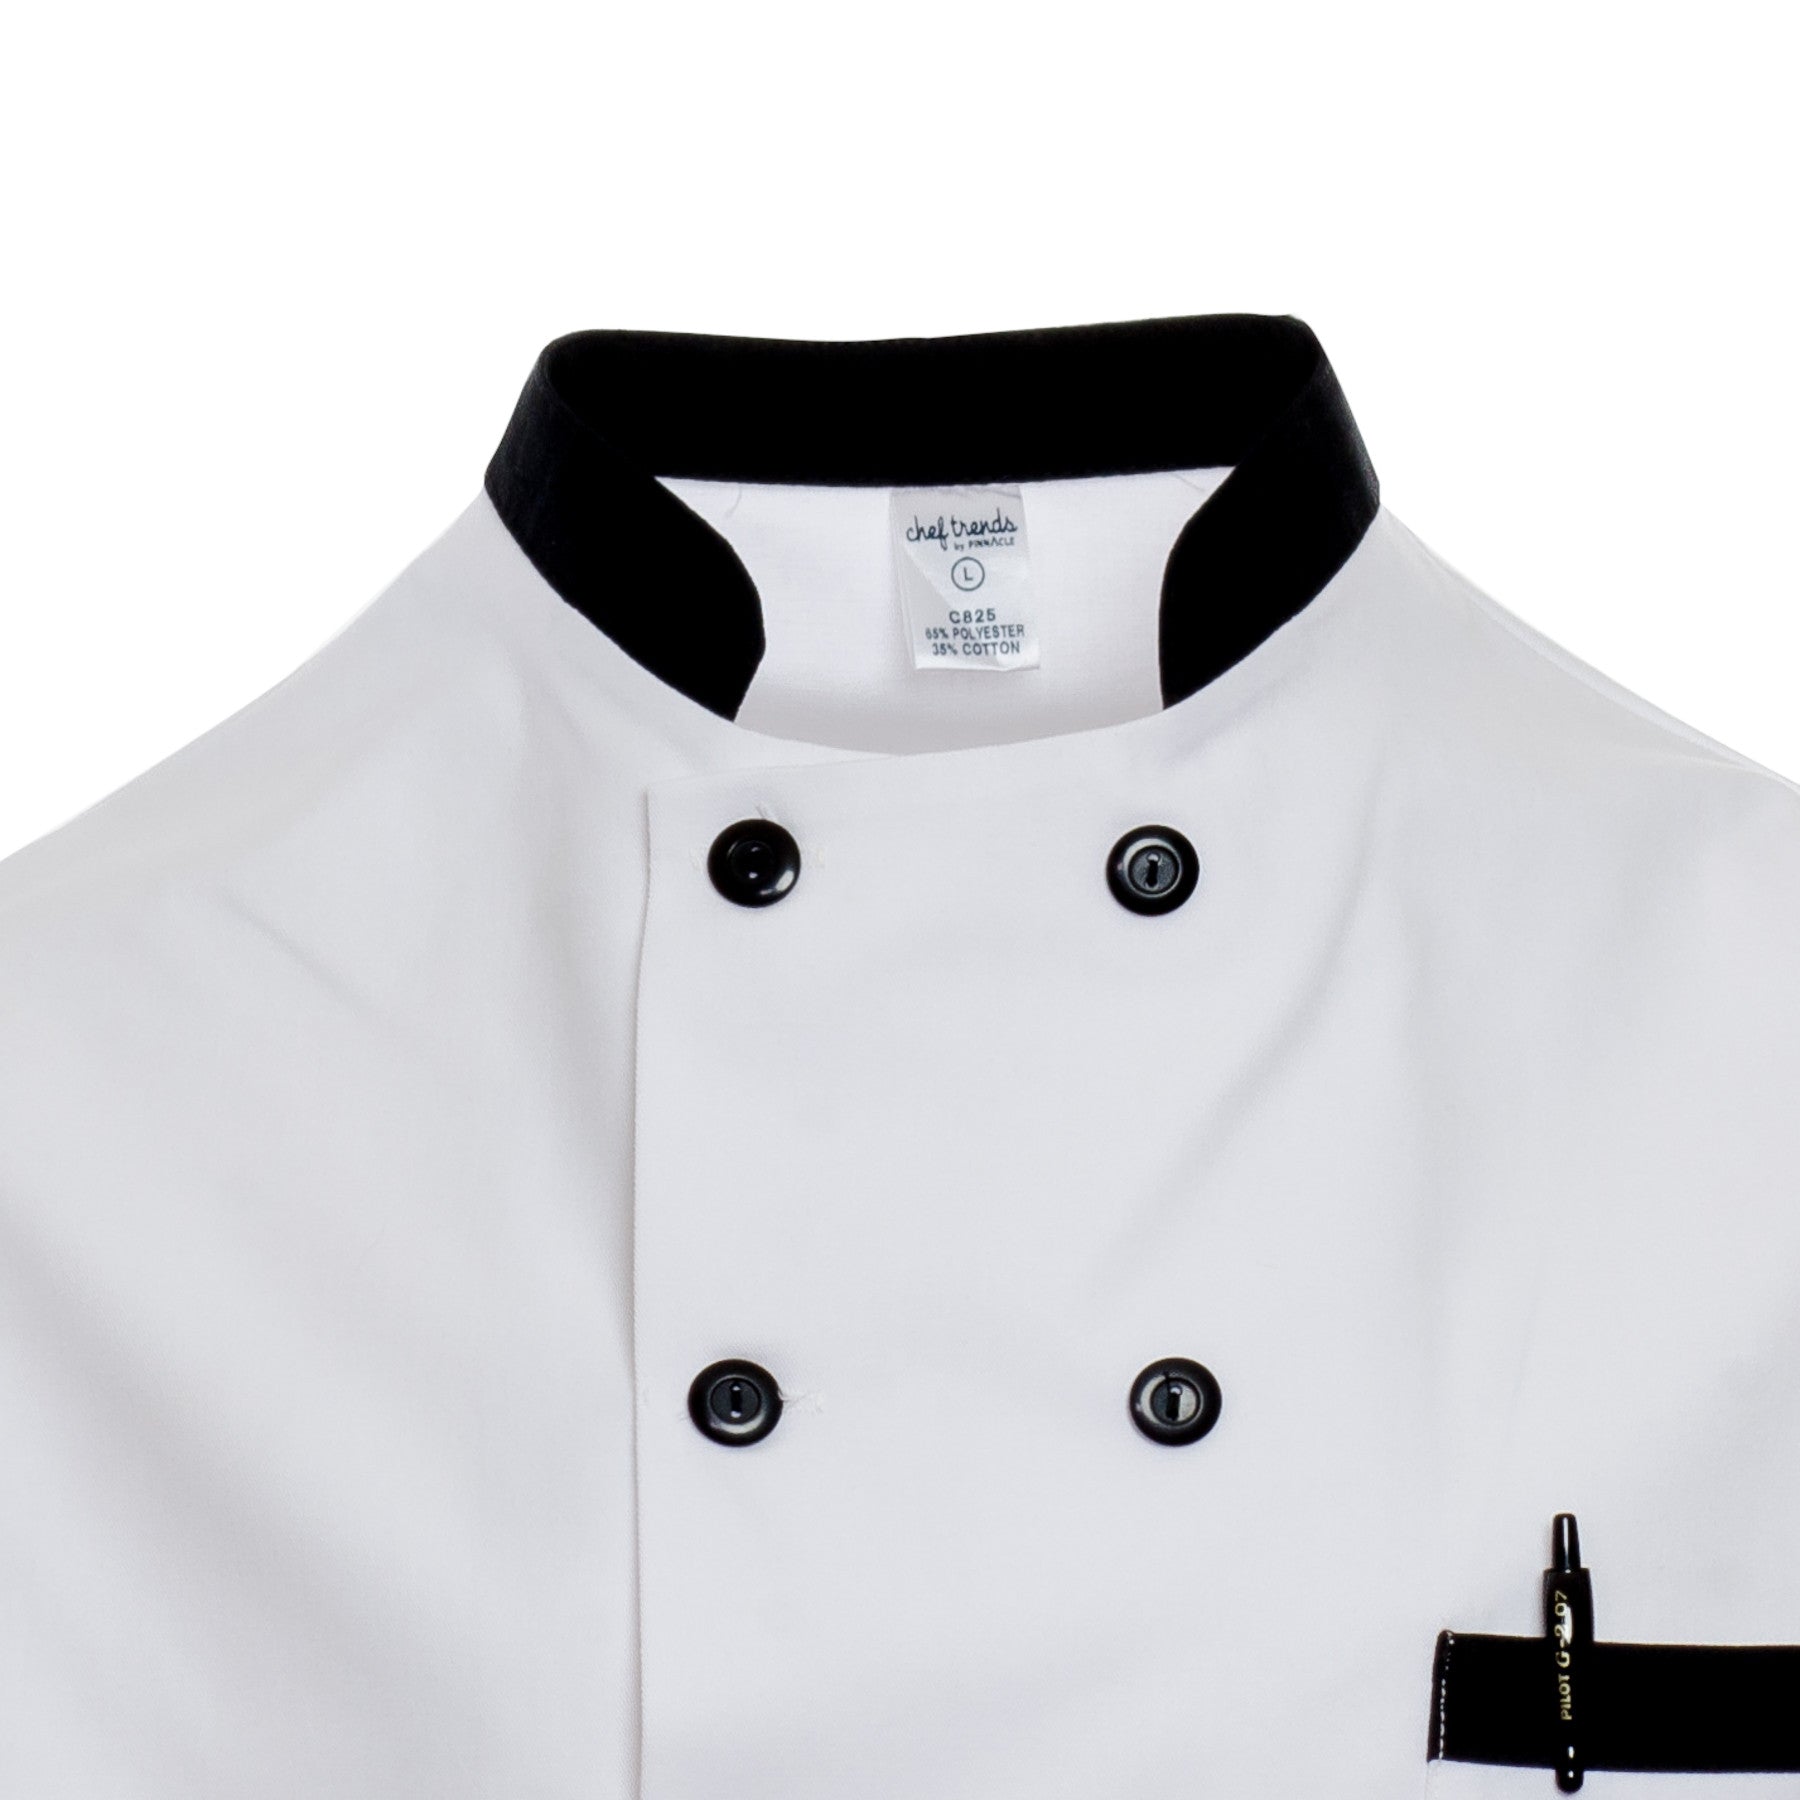 Executive White Chef Coat with Black Trim | Chef Duds